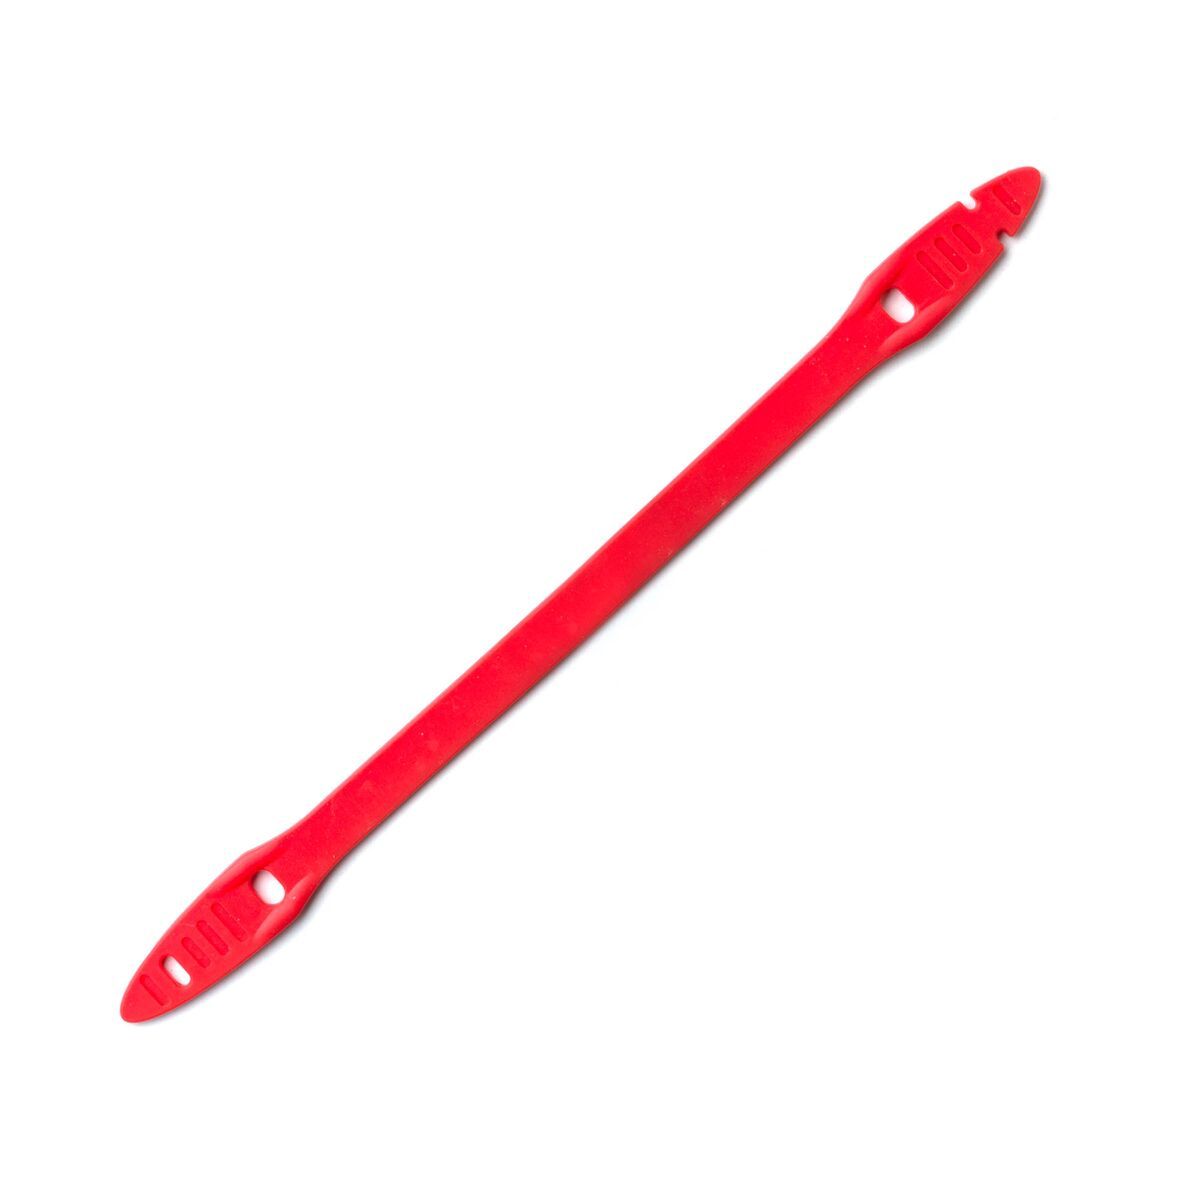 Silicon strap 150 mm (red)